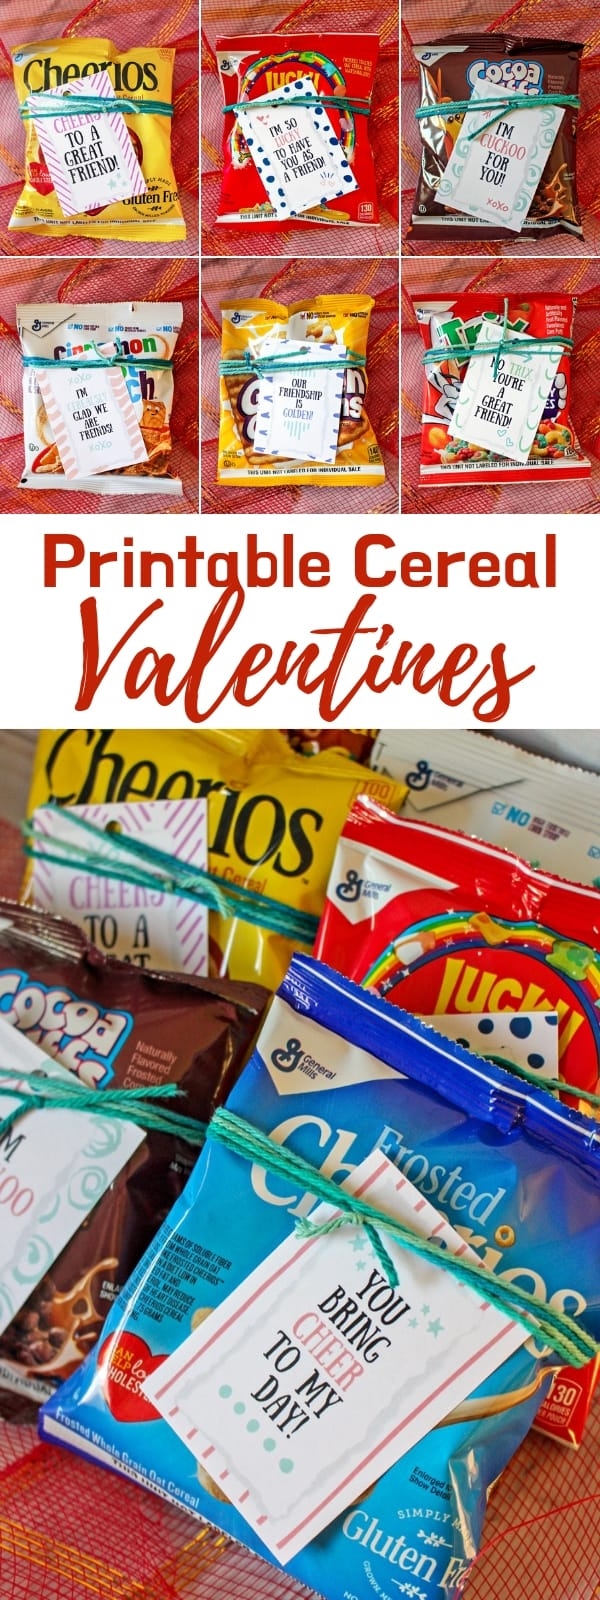 8 Different Cereal Valentines With Free Printable Gift Tags